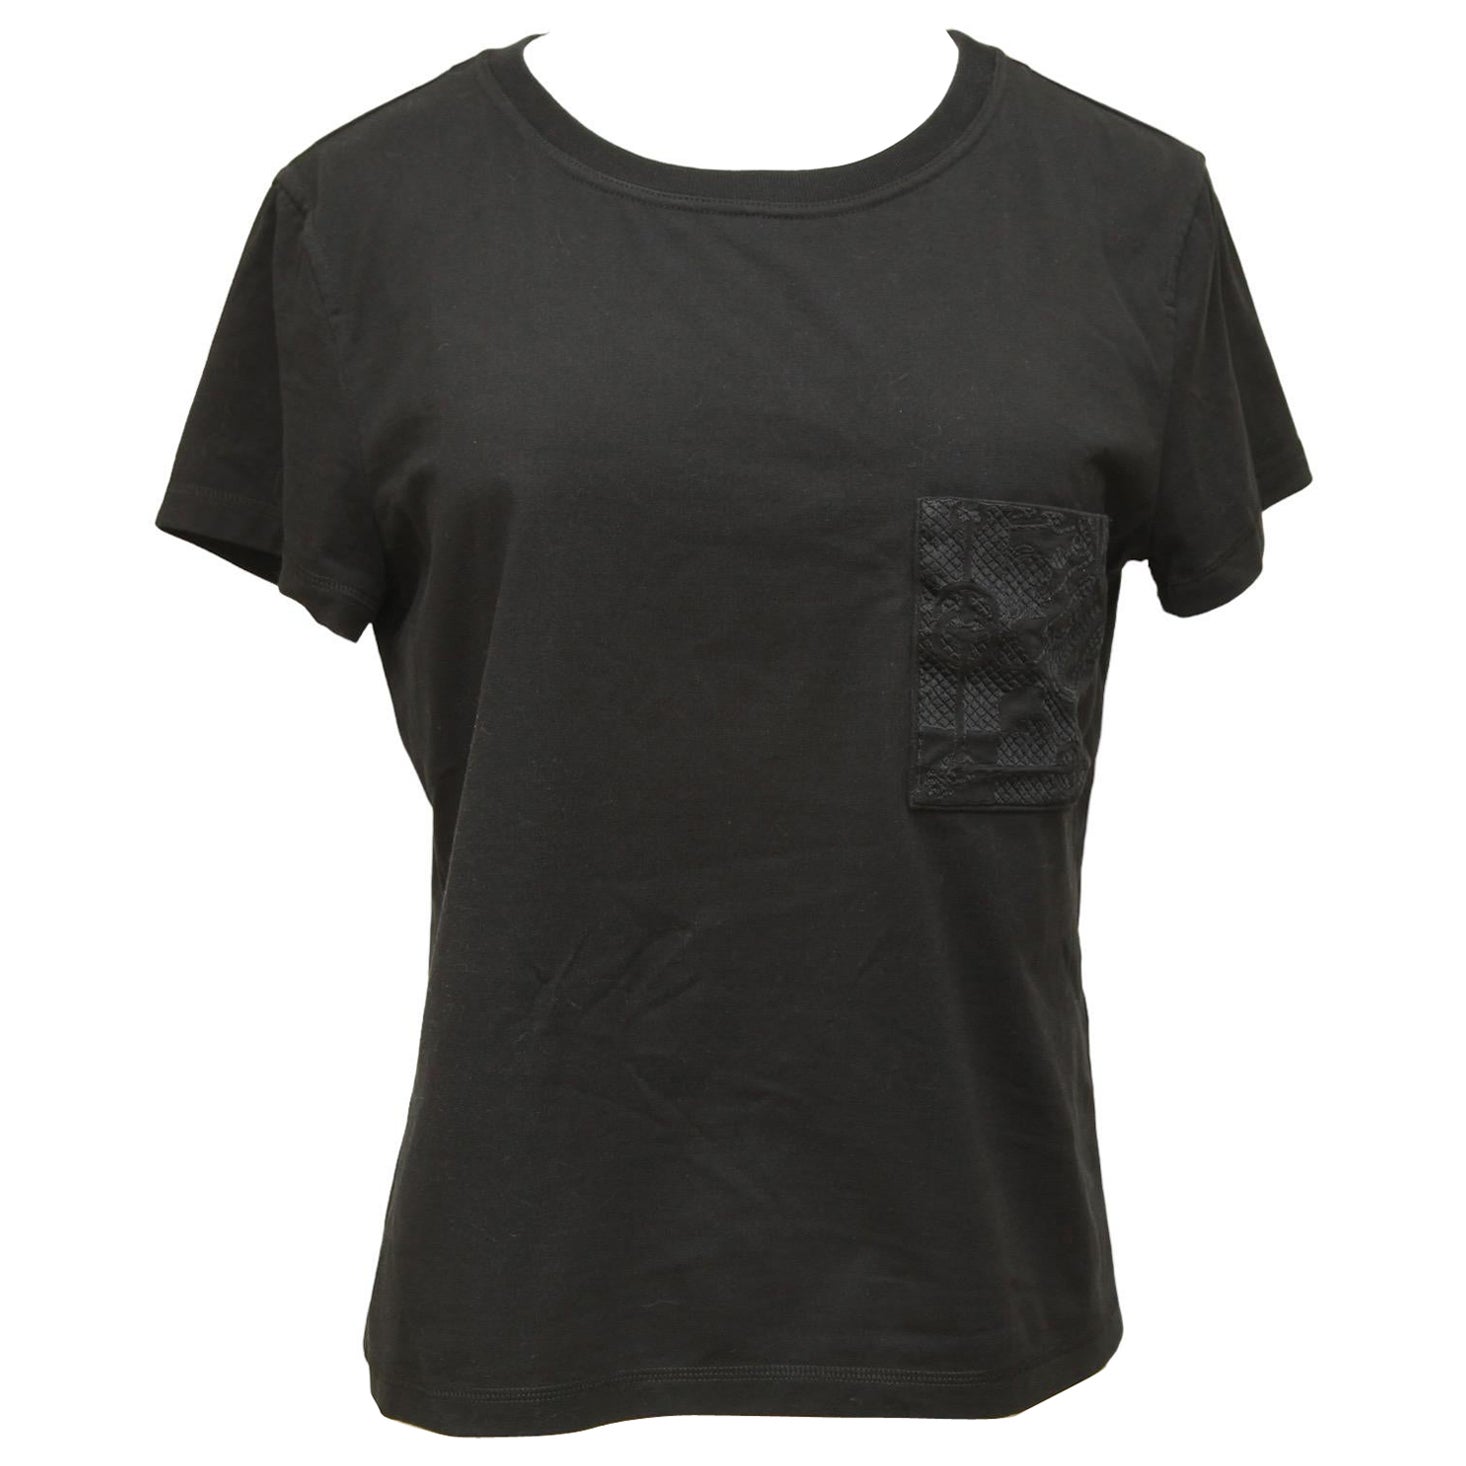 HERMES Black T-Shirt Top Mosaique Embroidery Pocket Short Sleeve Crew Neck 38 For Sale